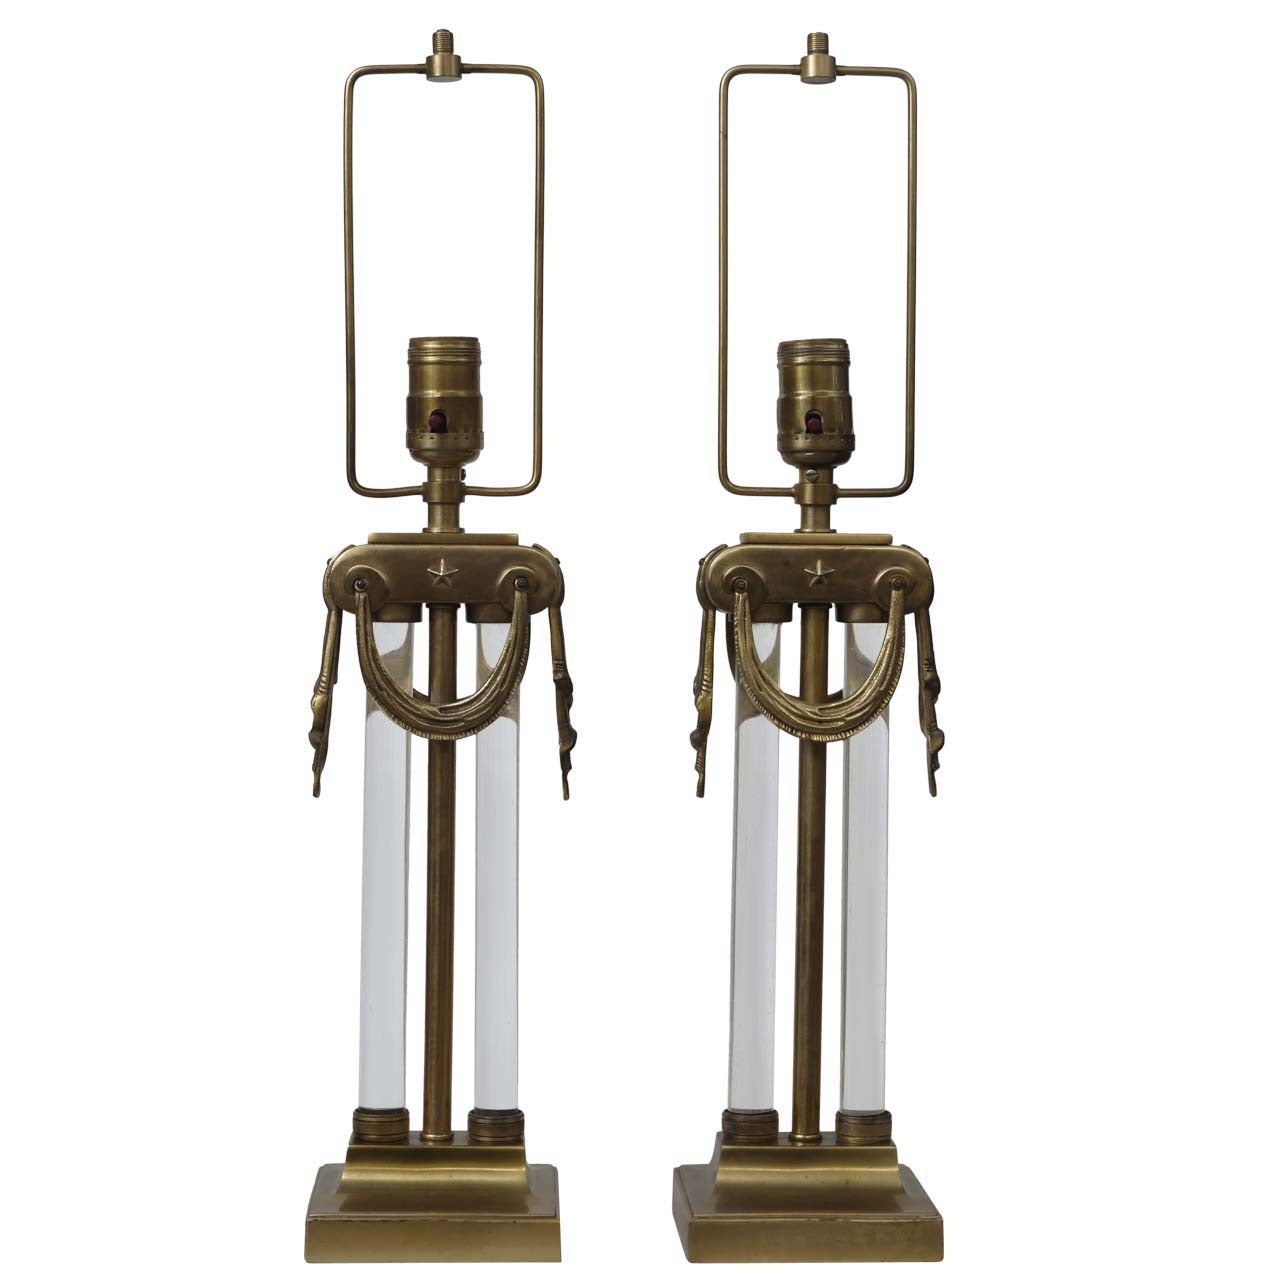 Rare Pair of Neoclassical Lamps by Mutual Sunset